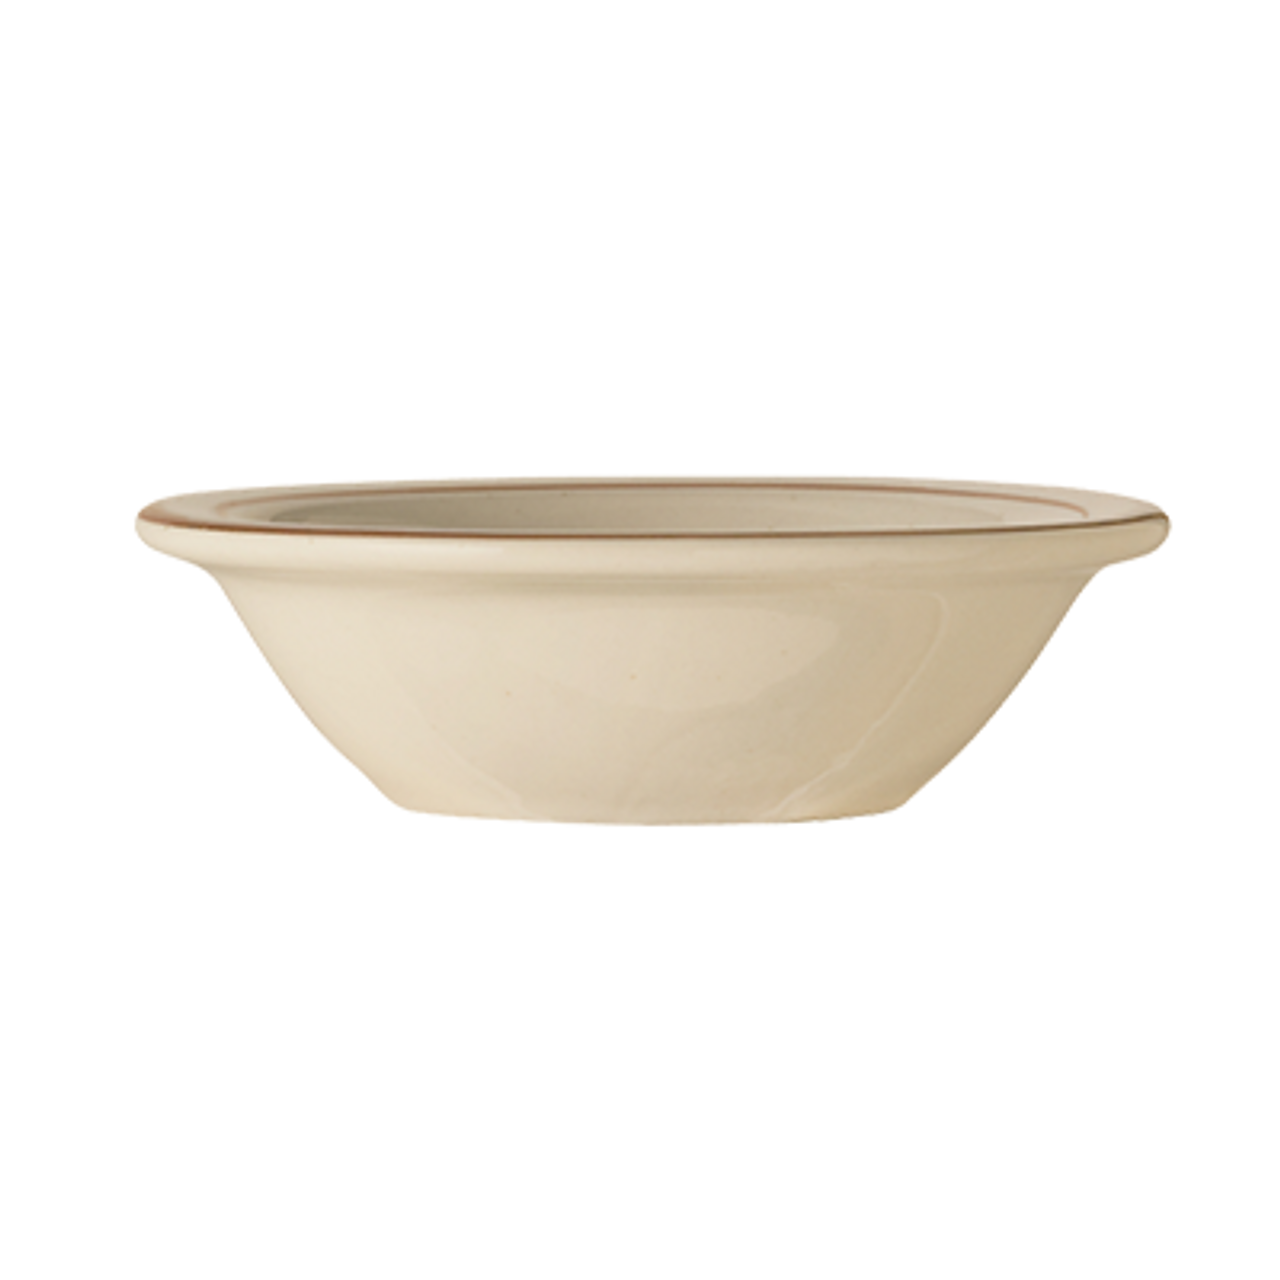 https://cdn11.bigcommerce.com/s-g3i86bef61/images/stencil/1280x1280/products/3846/1631/World-Tableware-DSD-11-Bowl__41158.1663087485.png?c=1